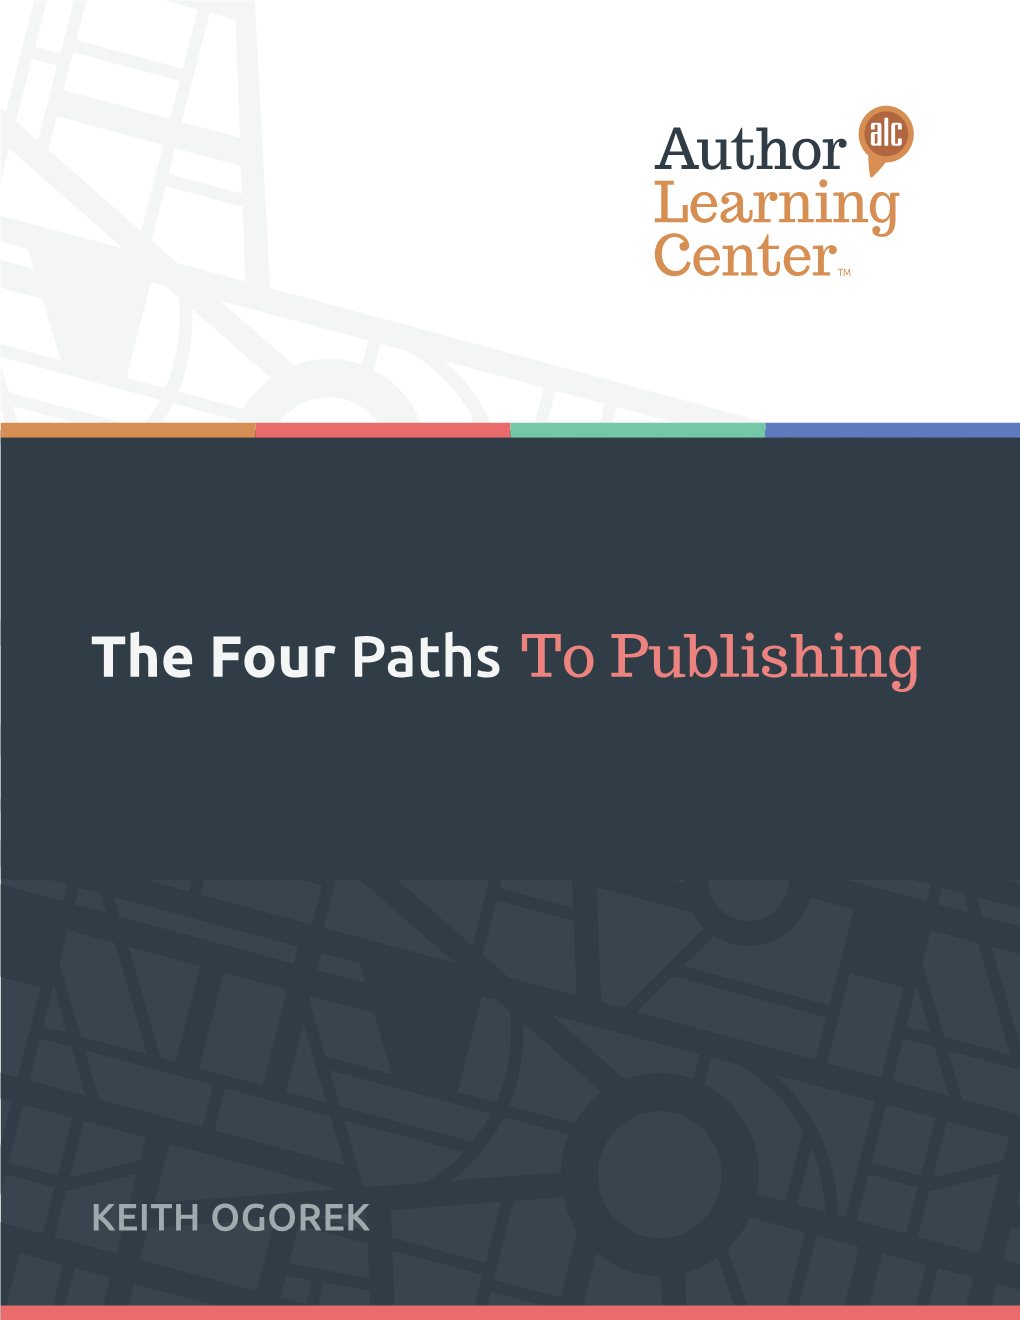 The Four Paths to Publishing.Pdf